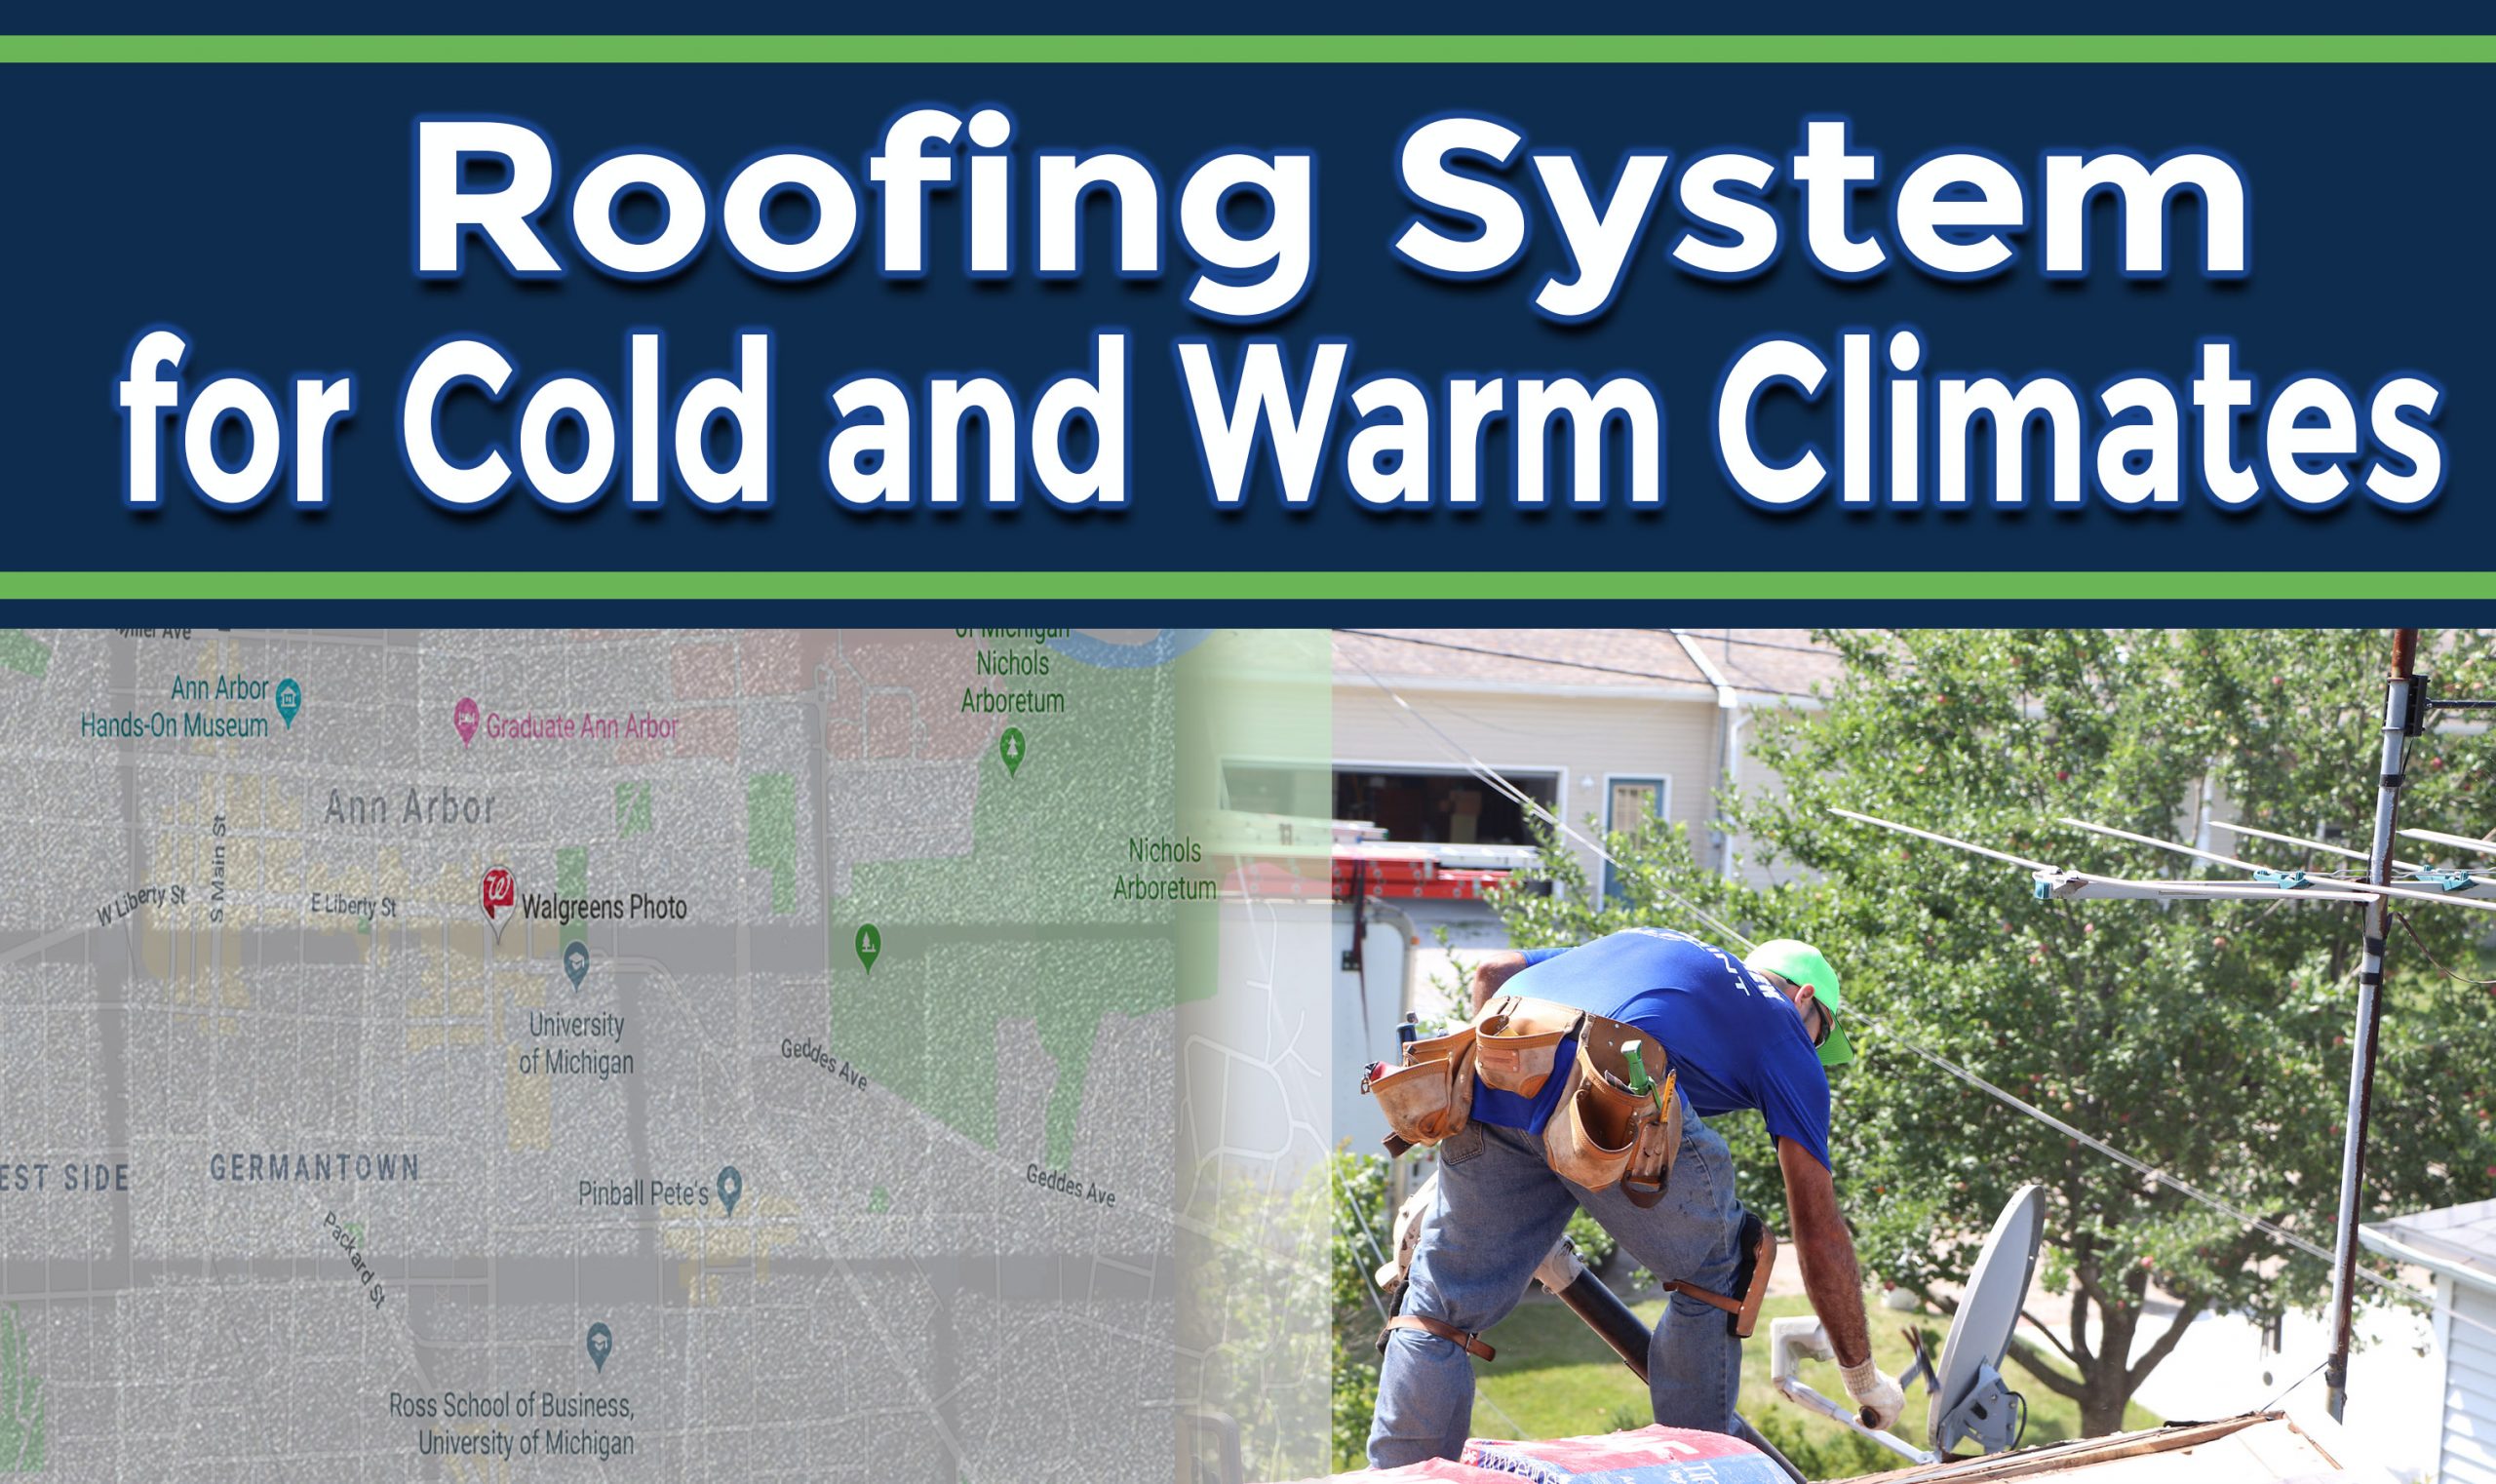 Roofing System to Consider for Cold and Warm Climates